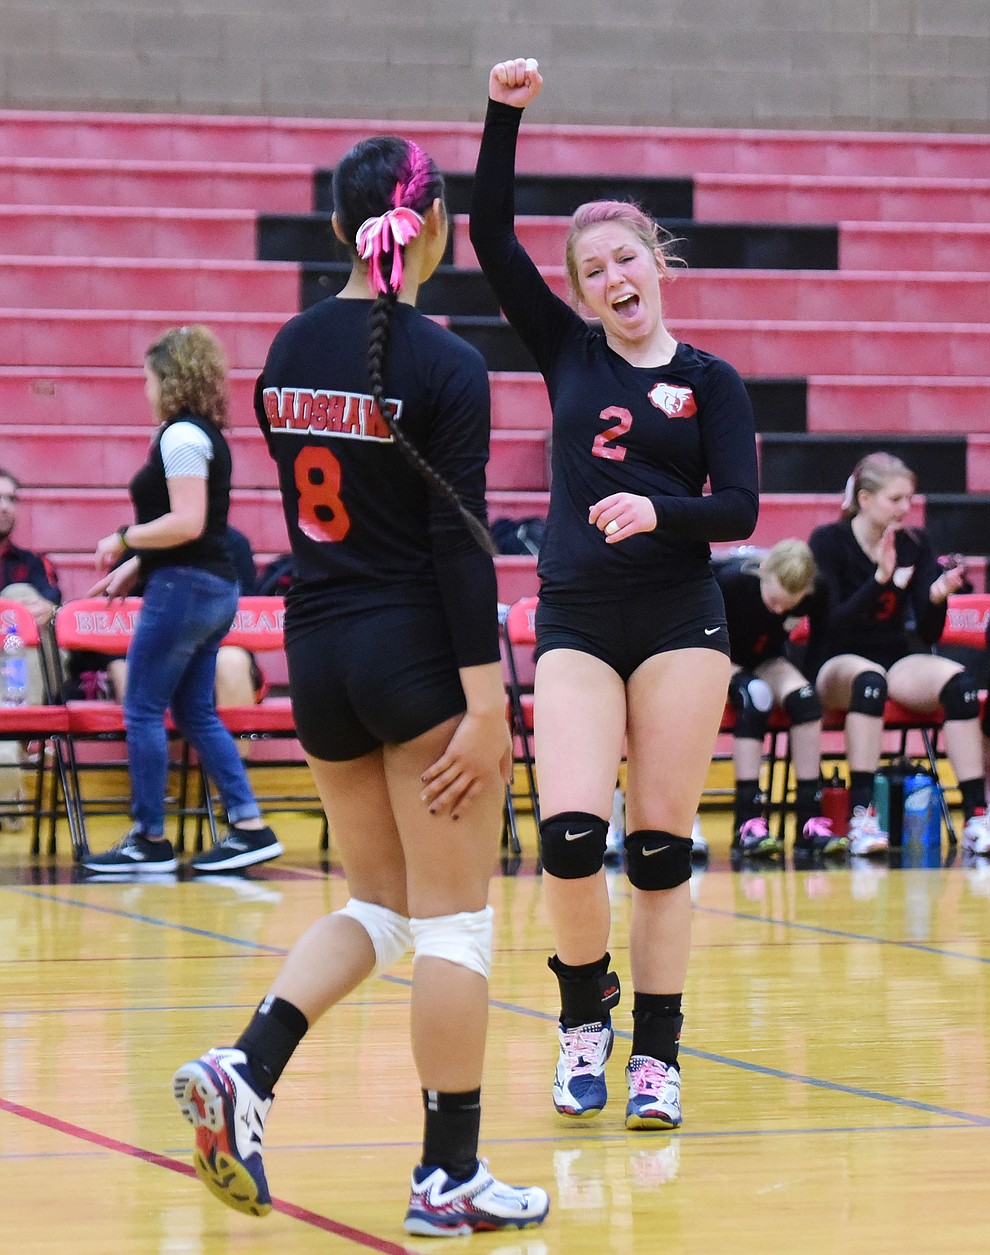 Bradshaw Mountain's Saylor Ford reacts after winning their second game as the Bears play in the play-in game for the AIA 4A State Volleyball Tournament against Peoria Thursday, Oct. 25, 2018 in Prescott Valley. (Les Stukenberg/Courier).